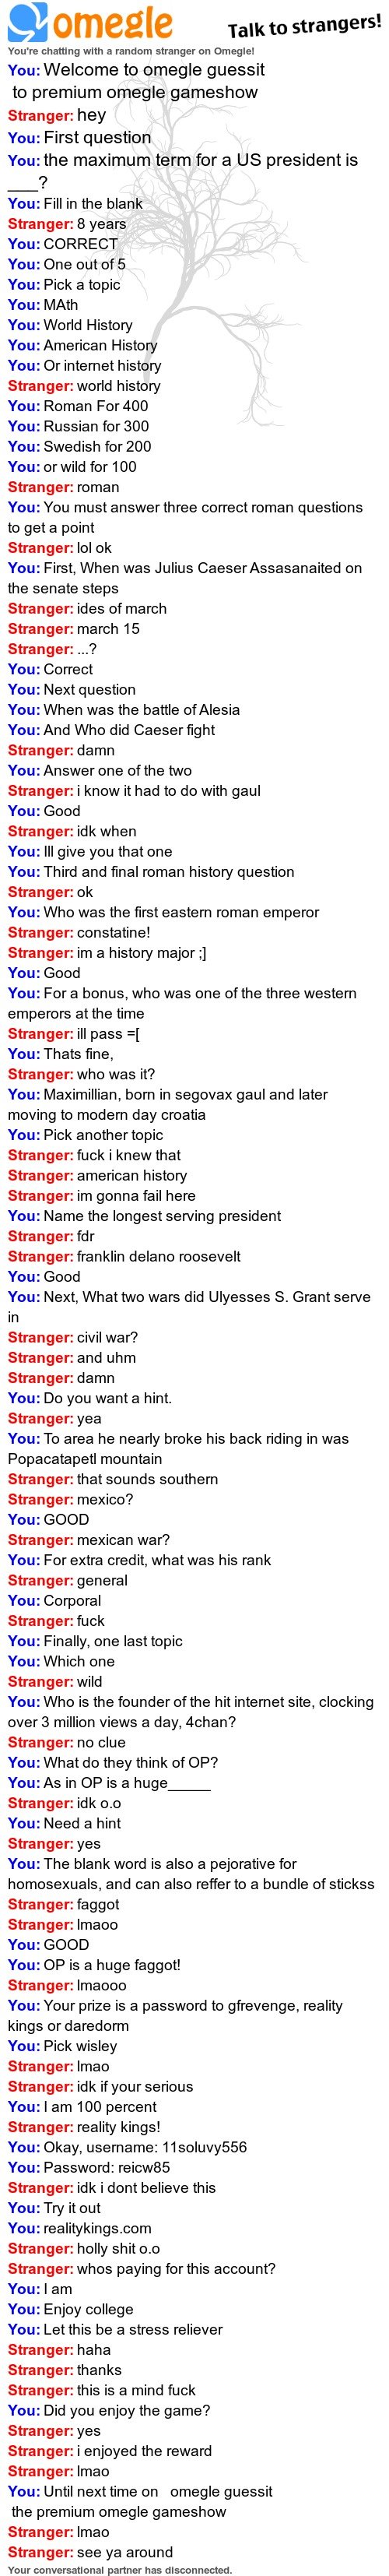 Omegle point game